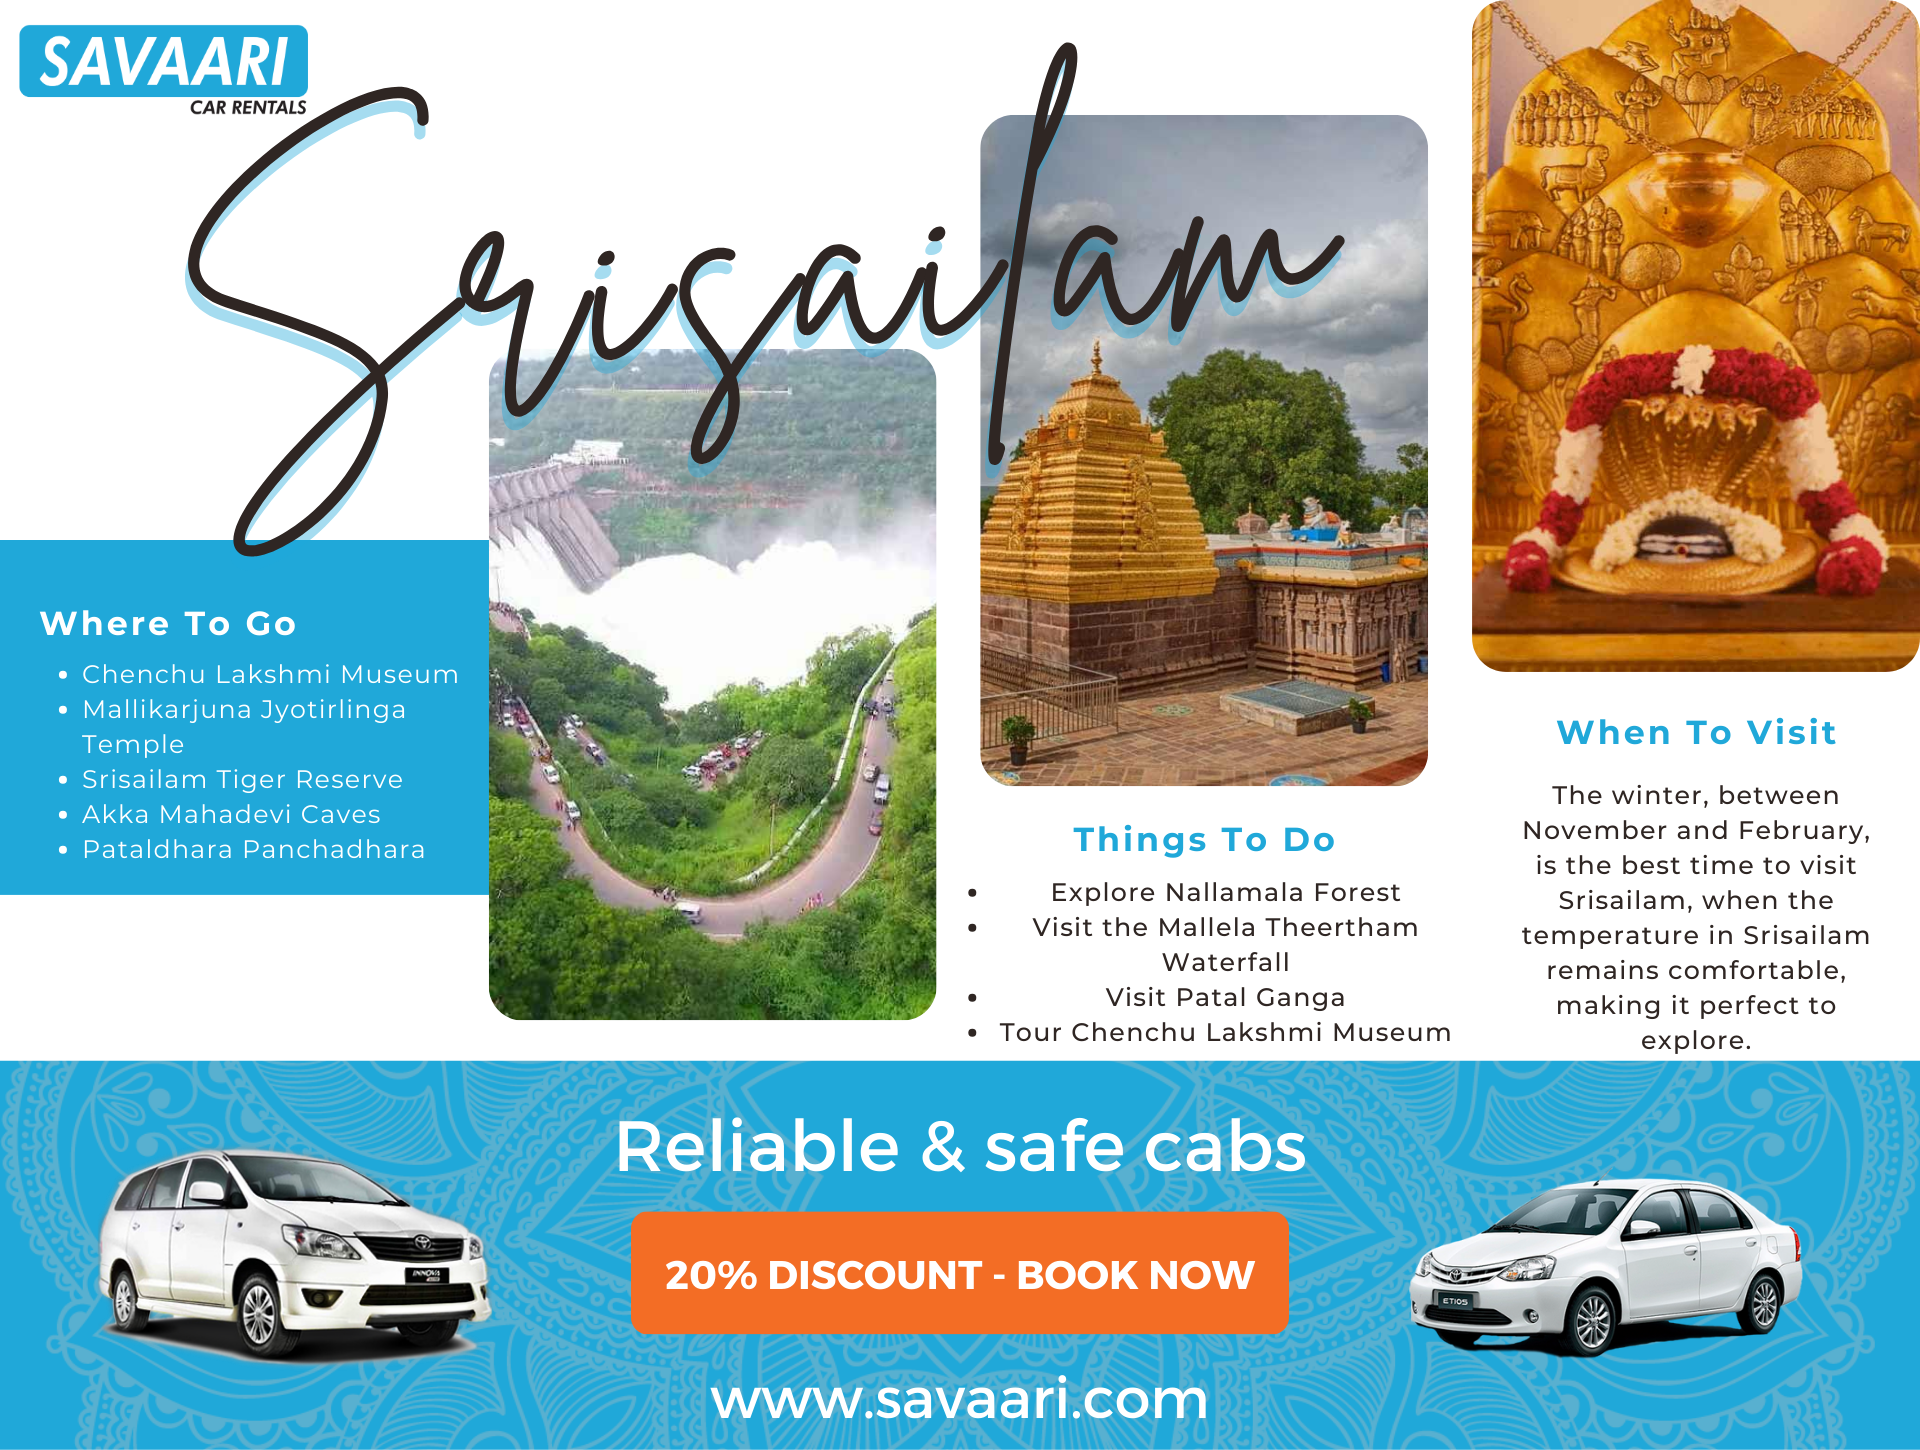 Things to do in Srisailam